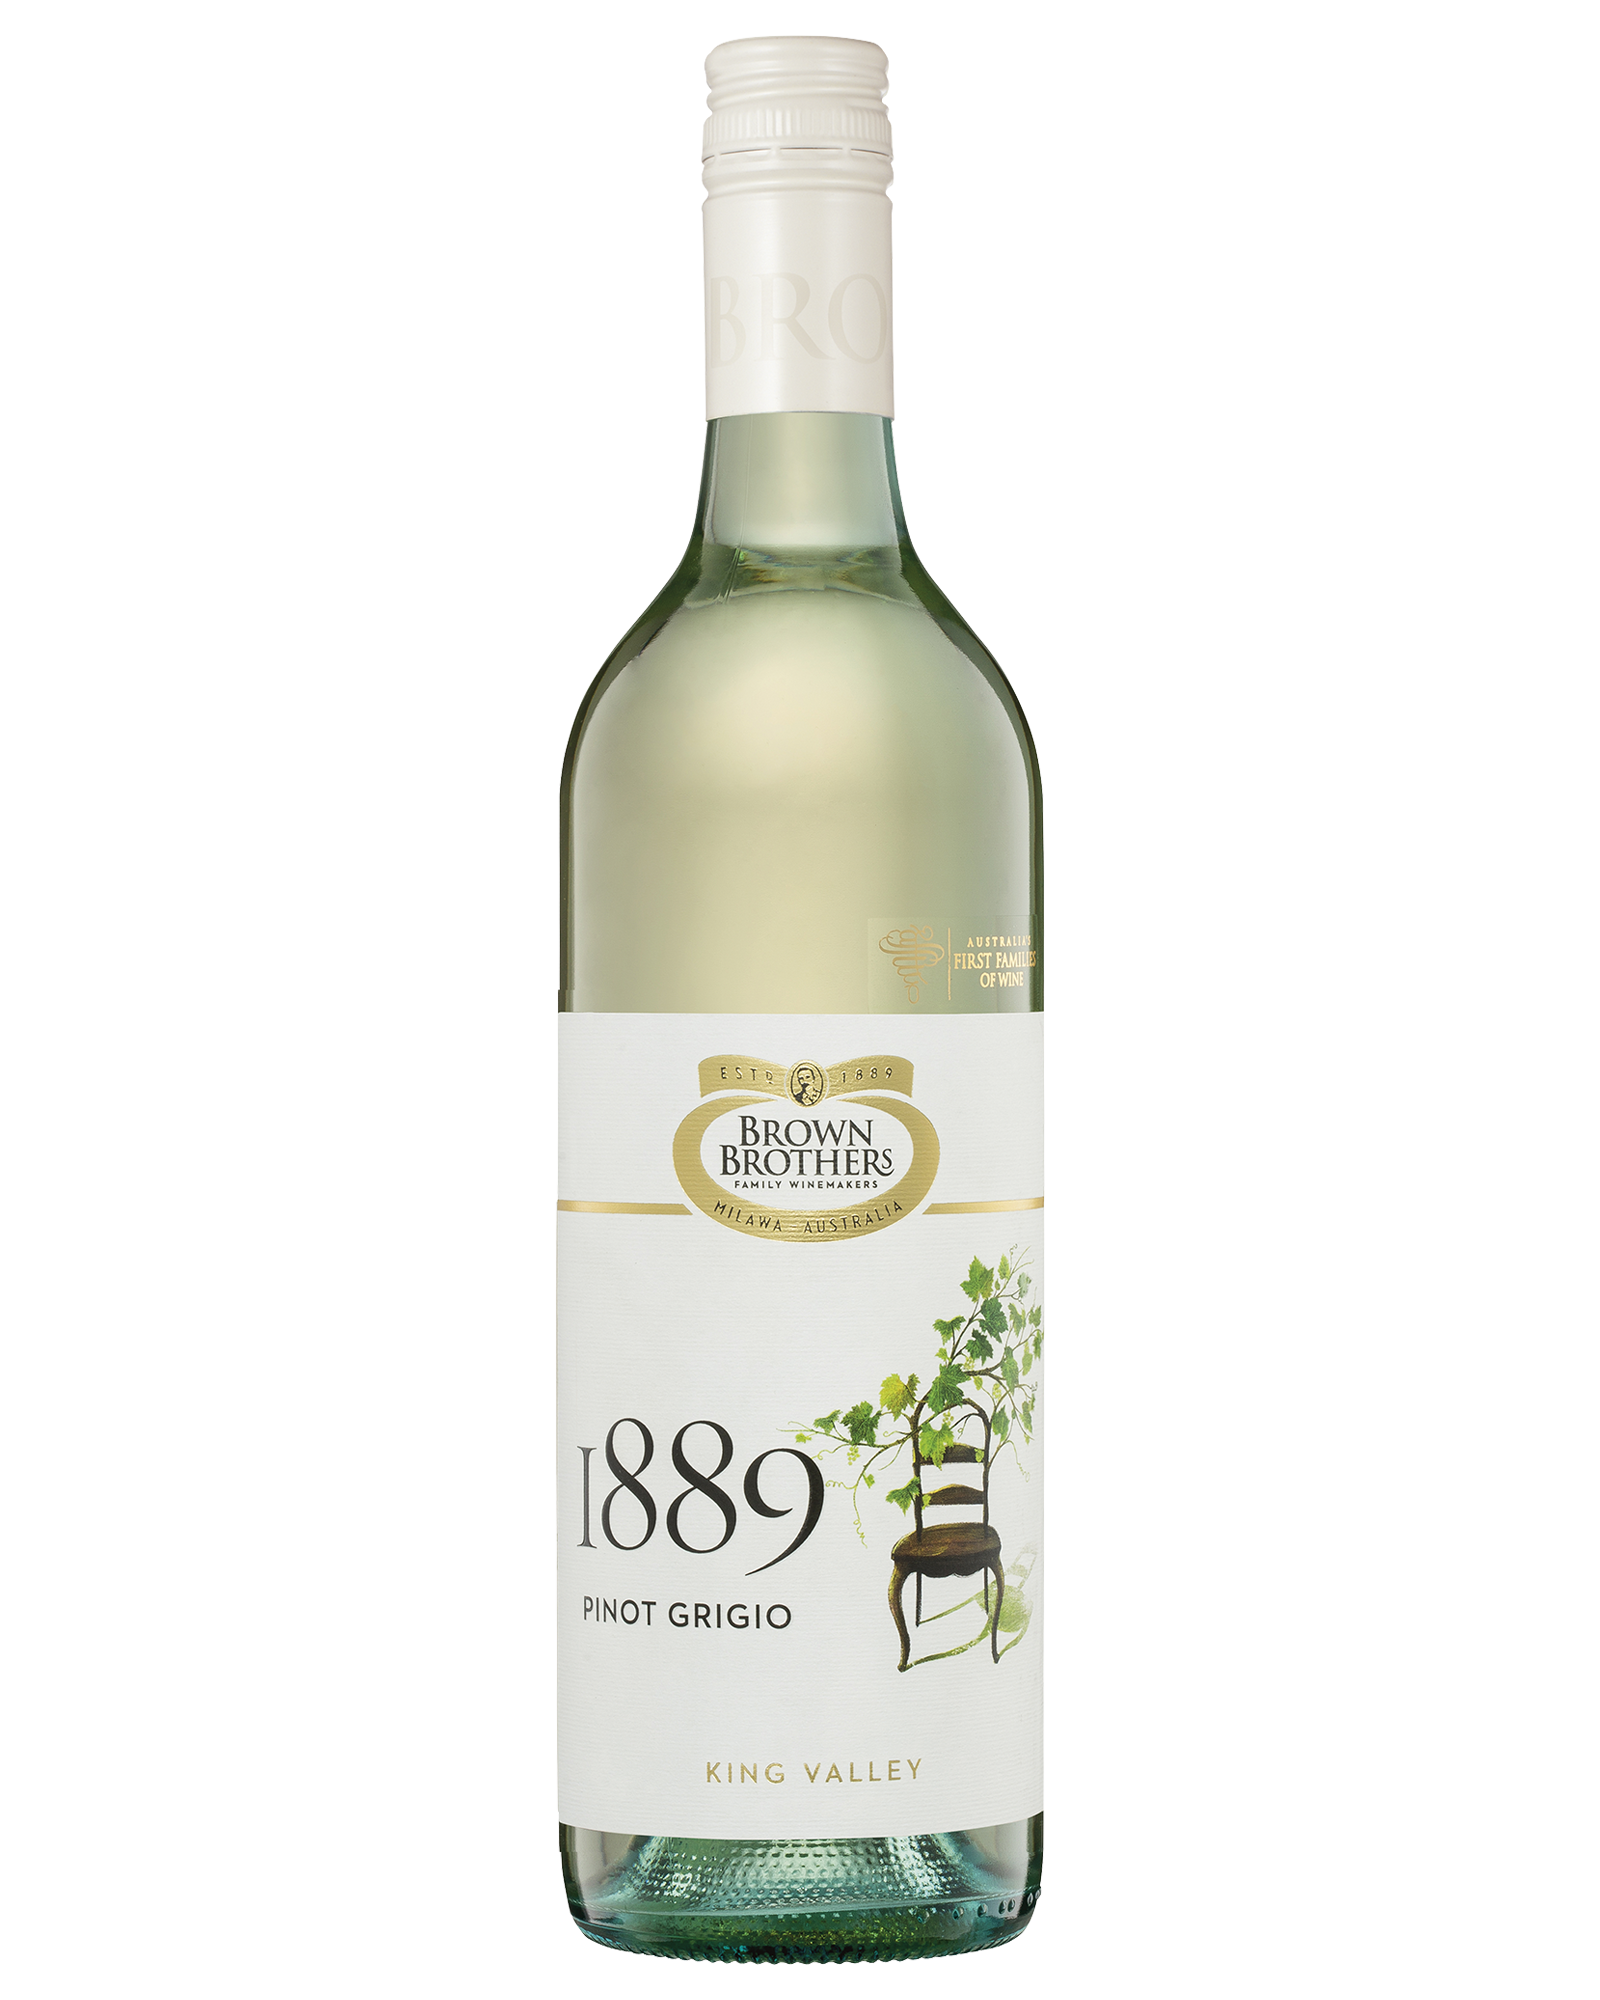 Brown Brothers 1889 King Valley Pinot Grigio 750mL